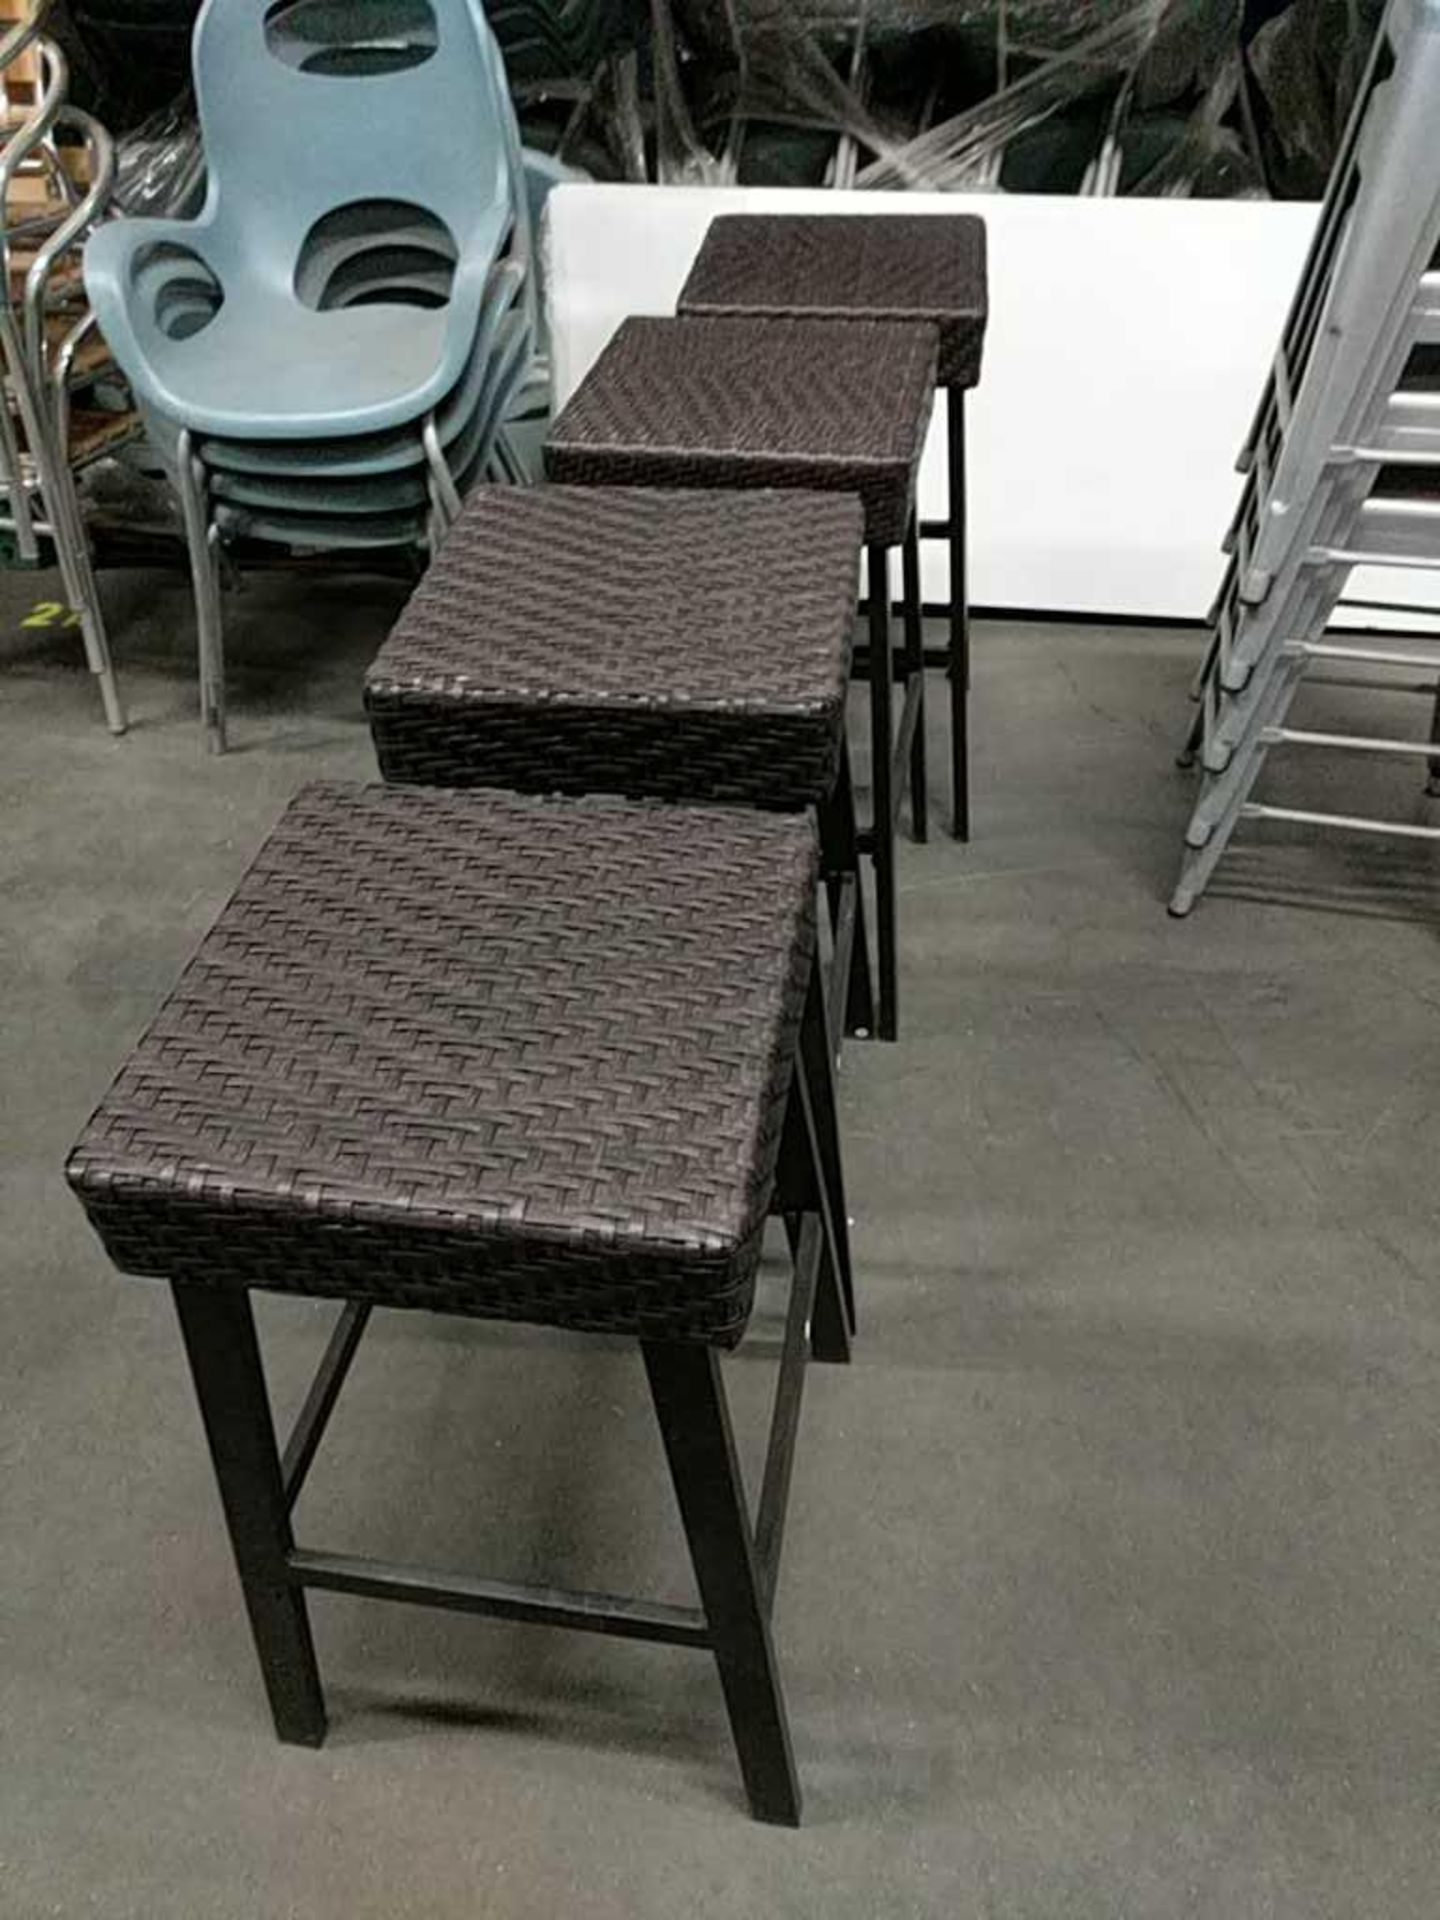 Lot of Wicker Stools - Image 2 of 3